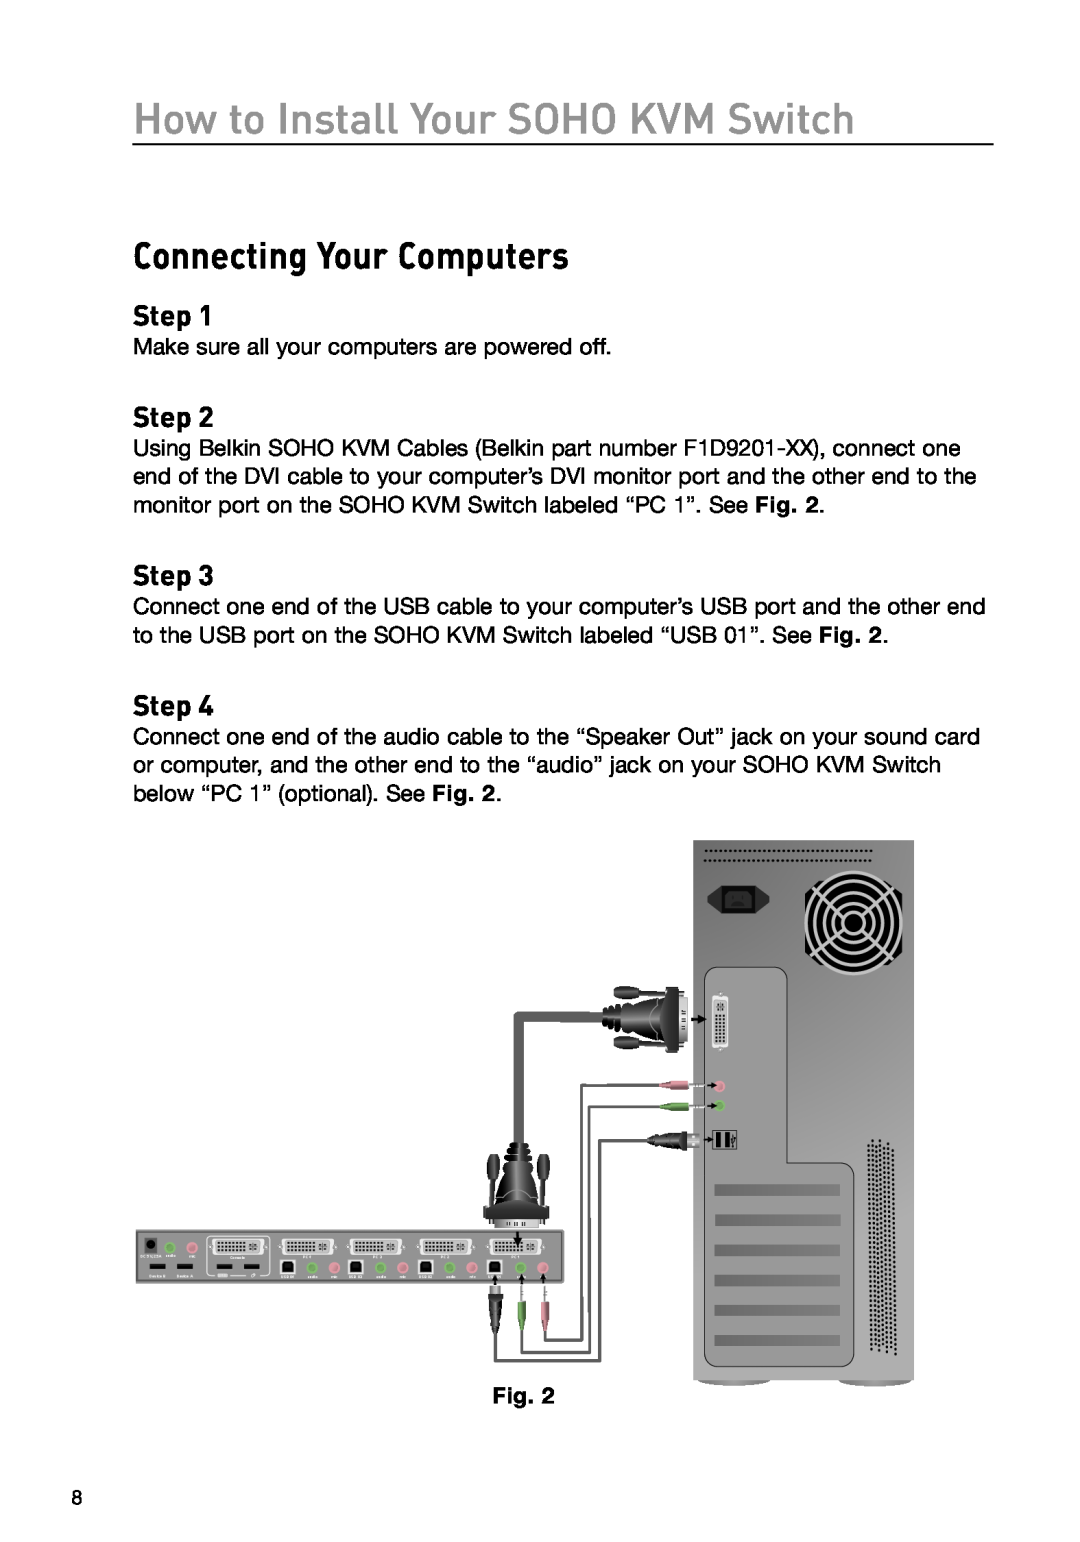 Belkin F1DD102U manual How to Install Your SOHO KVM Switch, Connecting Your Computers 